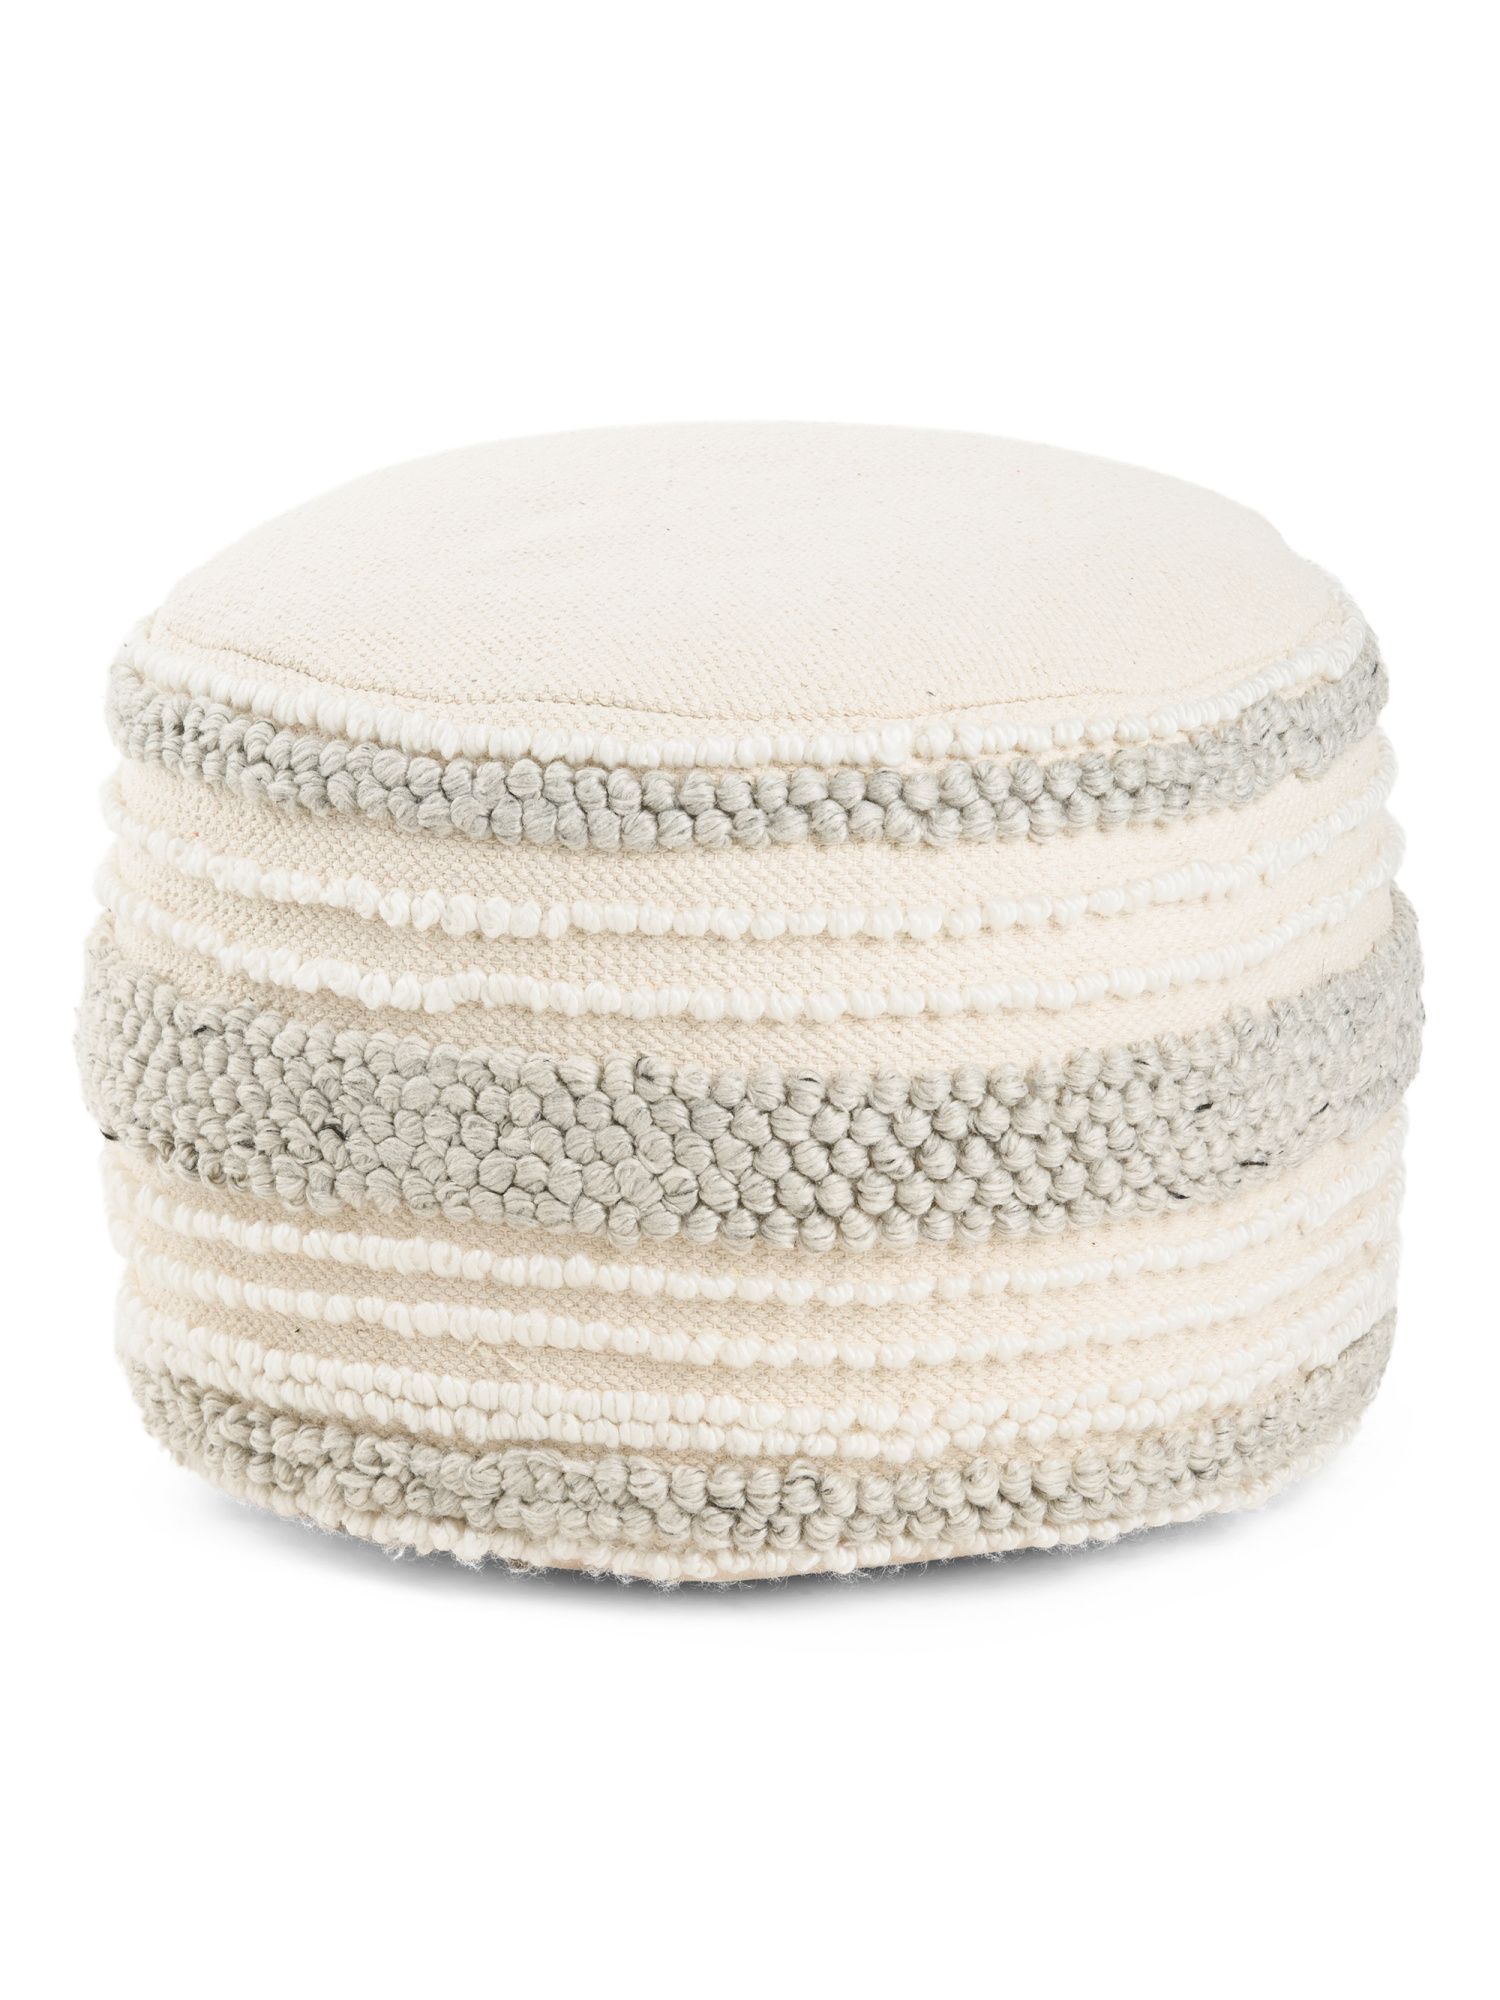 14x20 Made In India Textured Round Pouf | TJ Maxx